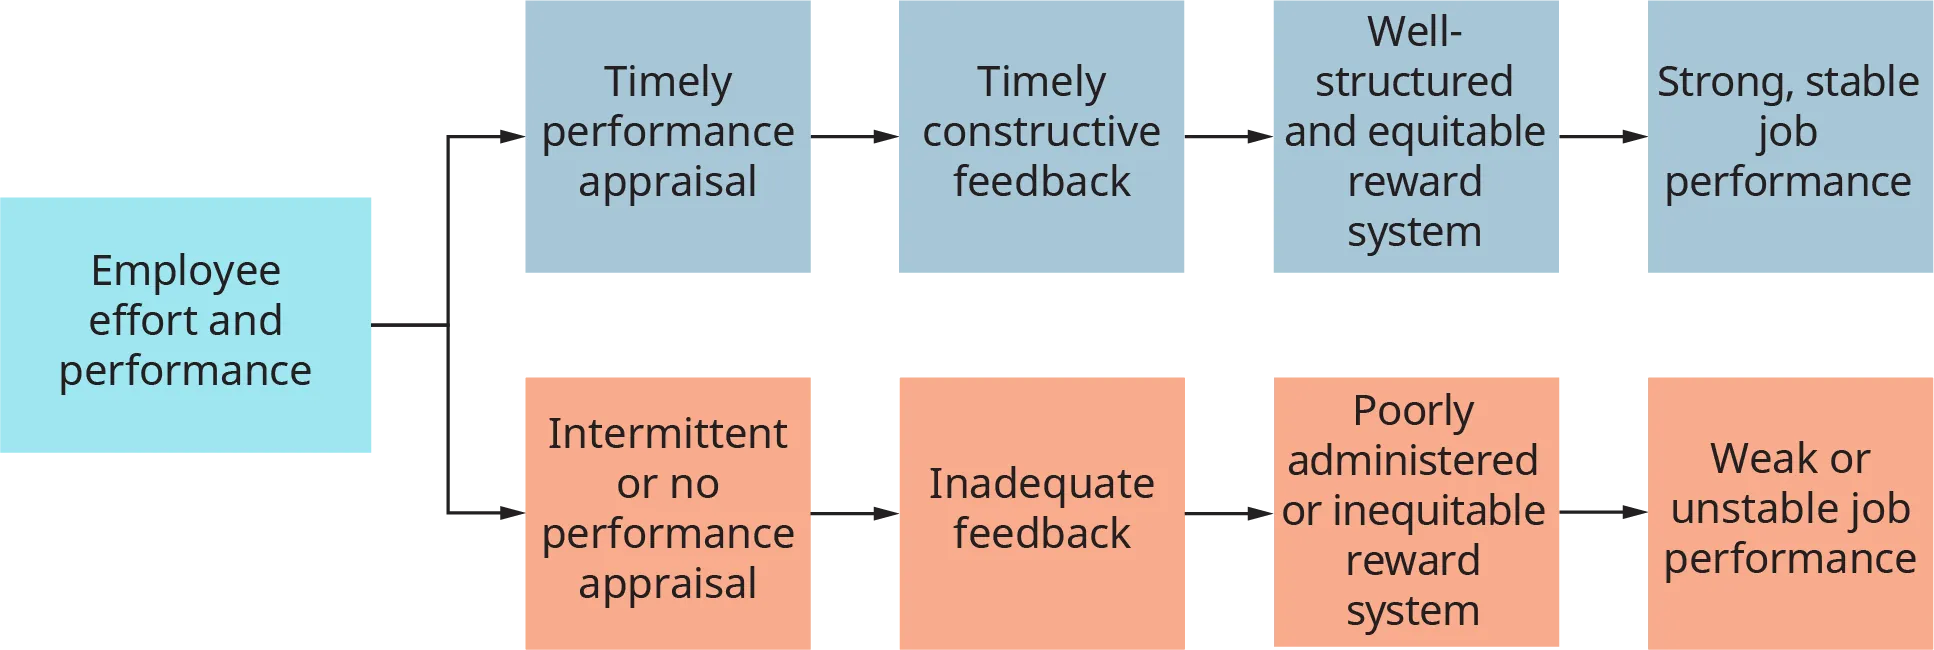 A diagram illustrates the positive and negative consequences of performance appraisal and reward process.